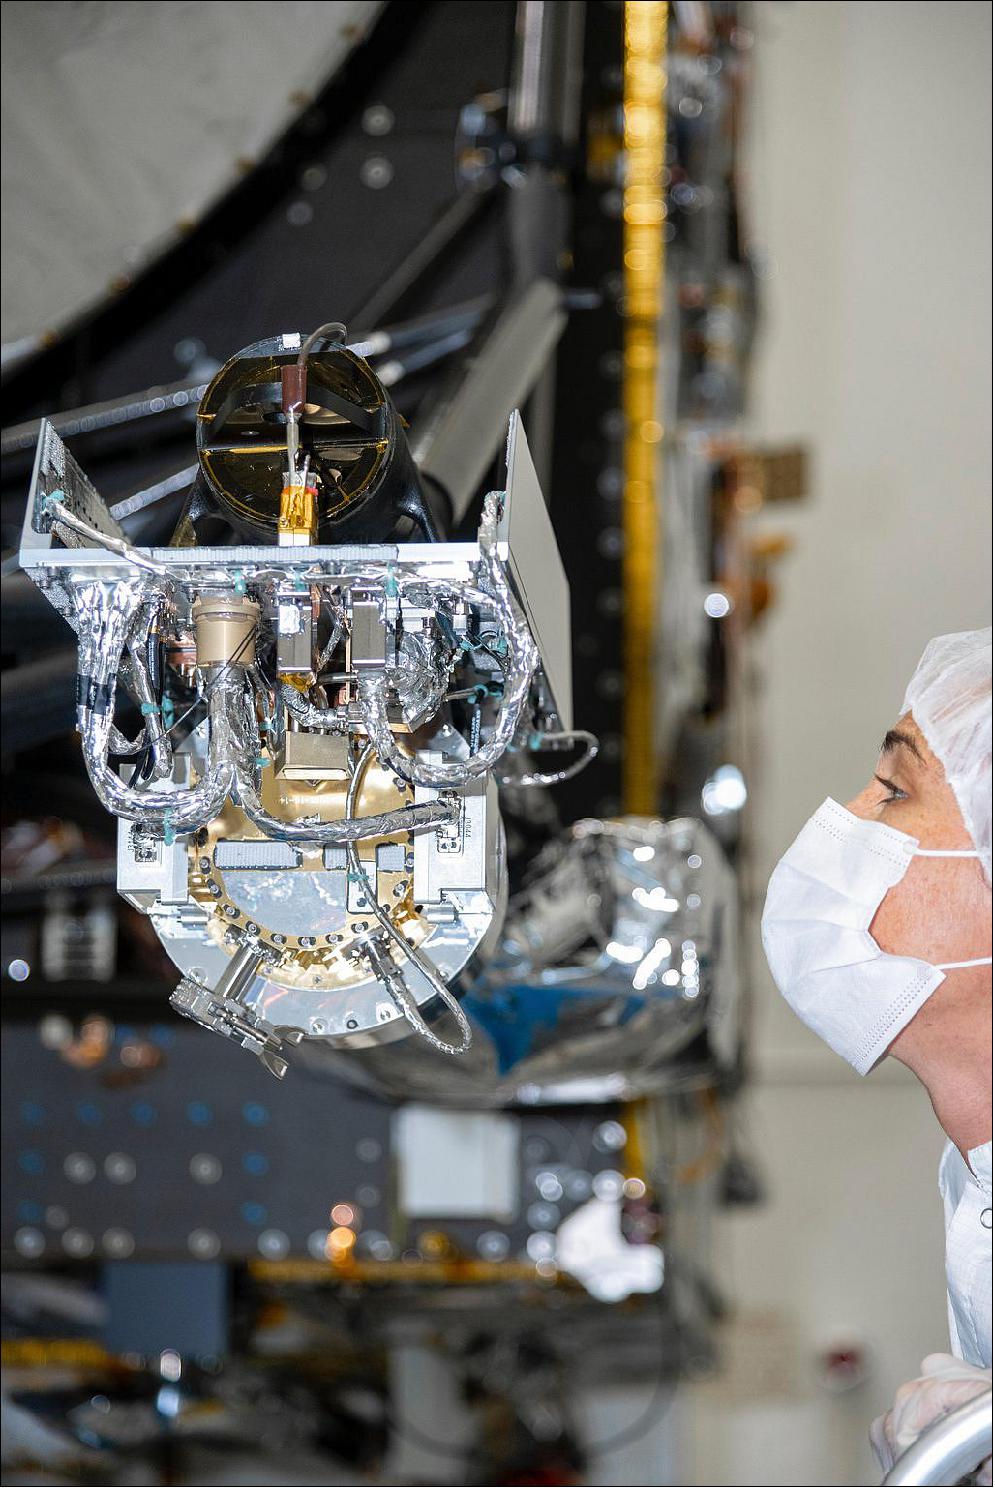 Figure 9: At NASA's Jet Propulsion Laboratory, an engineer inspects the gamma ray and neutron spectrometer as it is integrated into the agency's Psyche spacecraft. The instrument will help determine the elements that make up its target (image credit: NASA/JPL-Caltech)